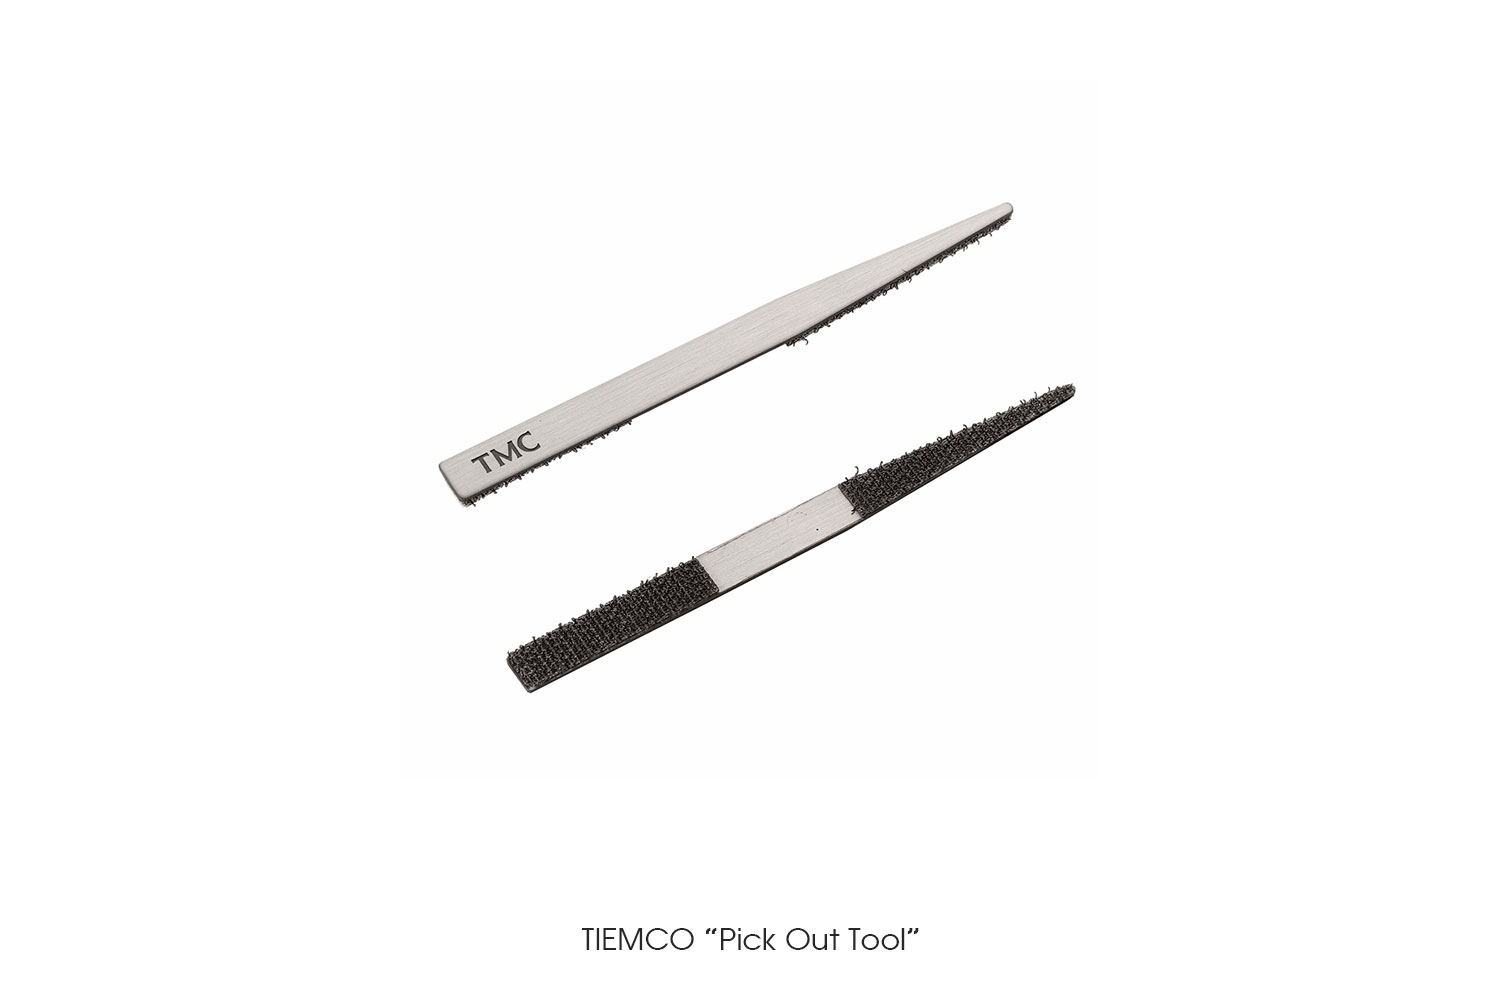 TIEMCO "Pick Out Tool"